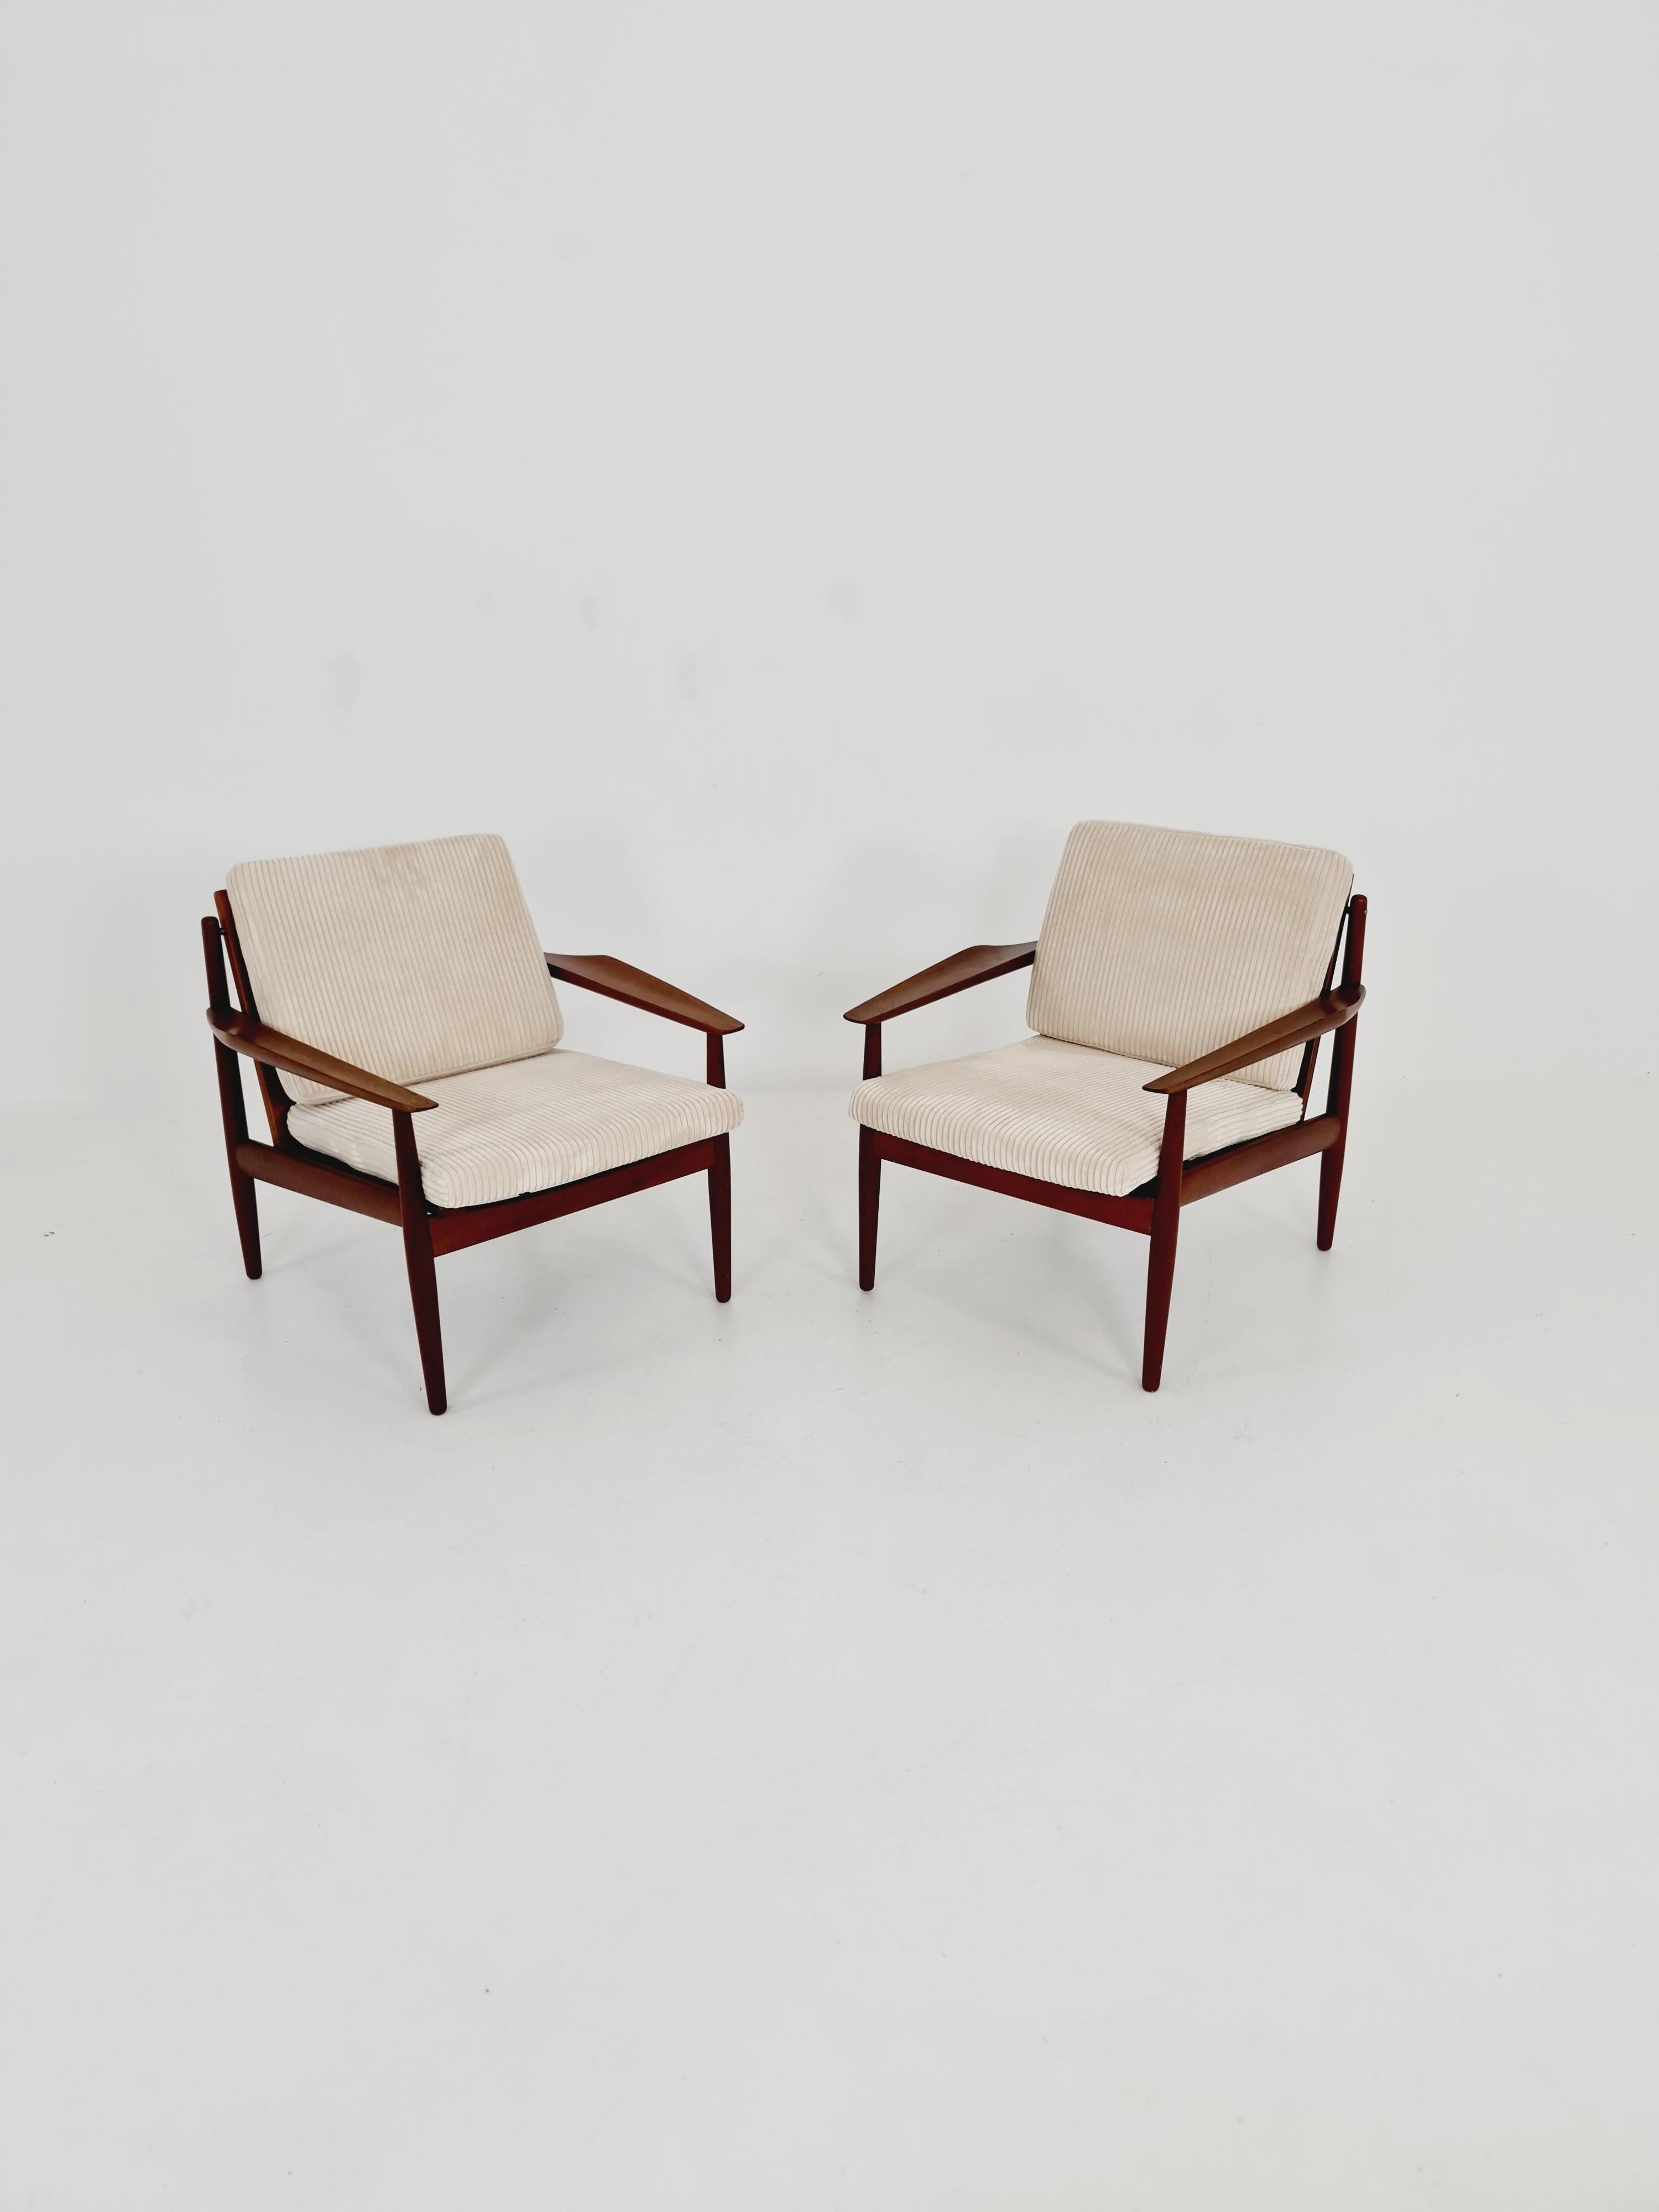 Mid century easy lounge chairs by Grete Jalk, Denmark, teak & brass, 19560s, Set of 2

It is in great condition. However, as with all the vintage items some minor wear marks should be expected. The upholstery is in outstanding condition.